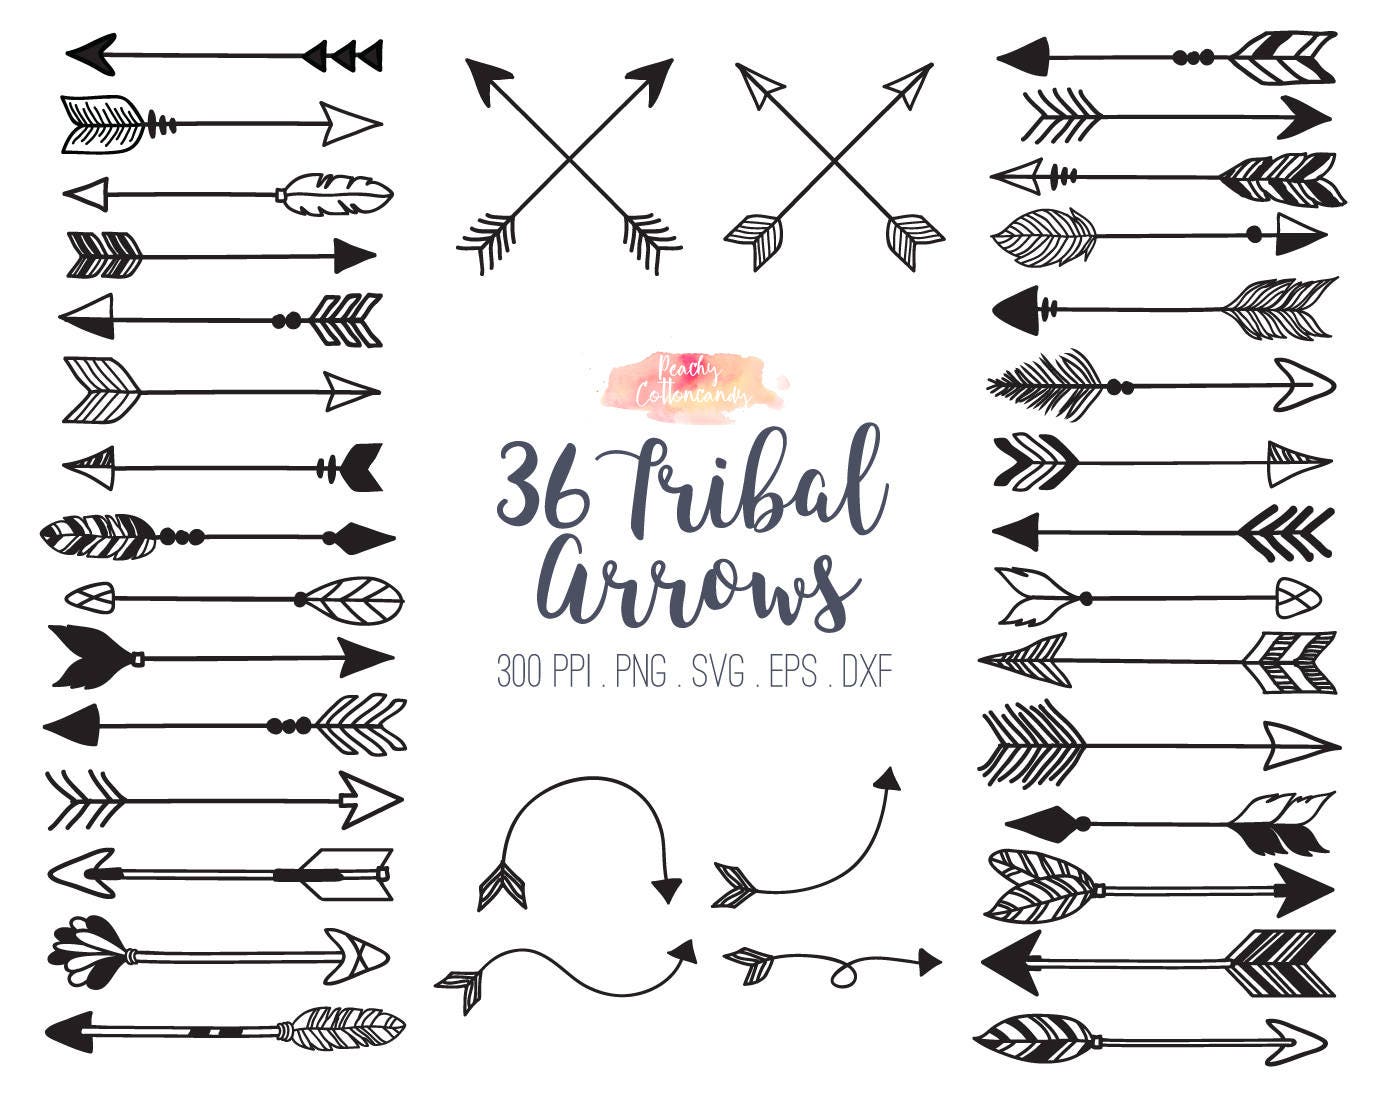 Download BUY 2 GET 1 FREE 36 tribal arrow svg dxf eps vector tribal